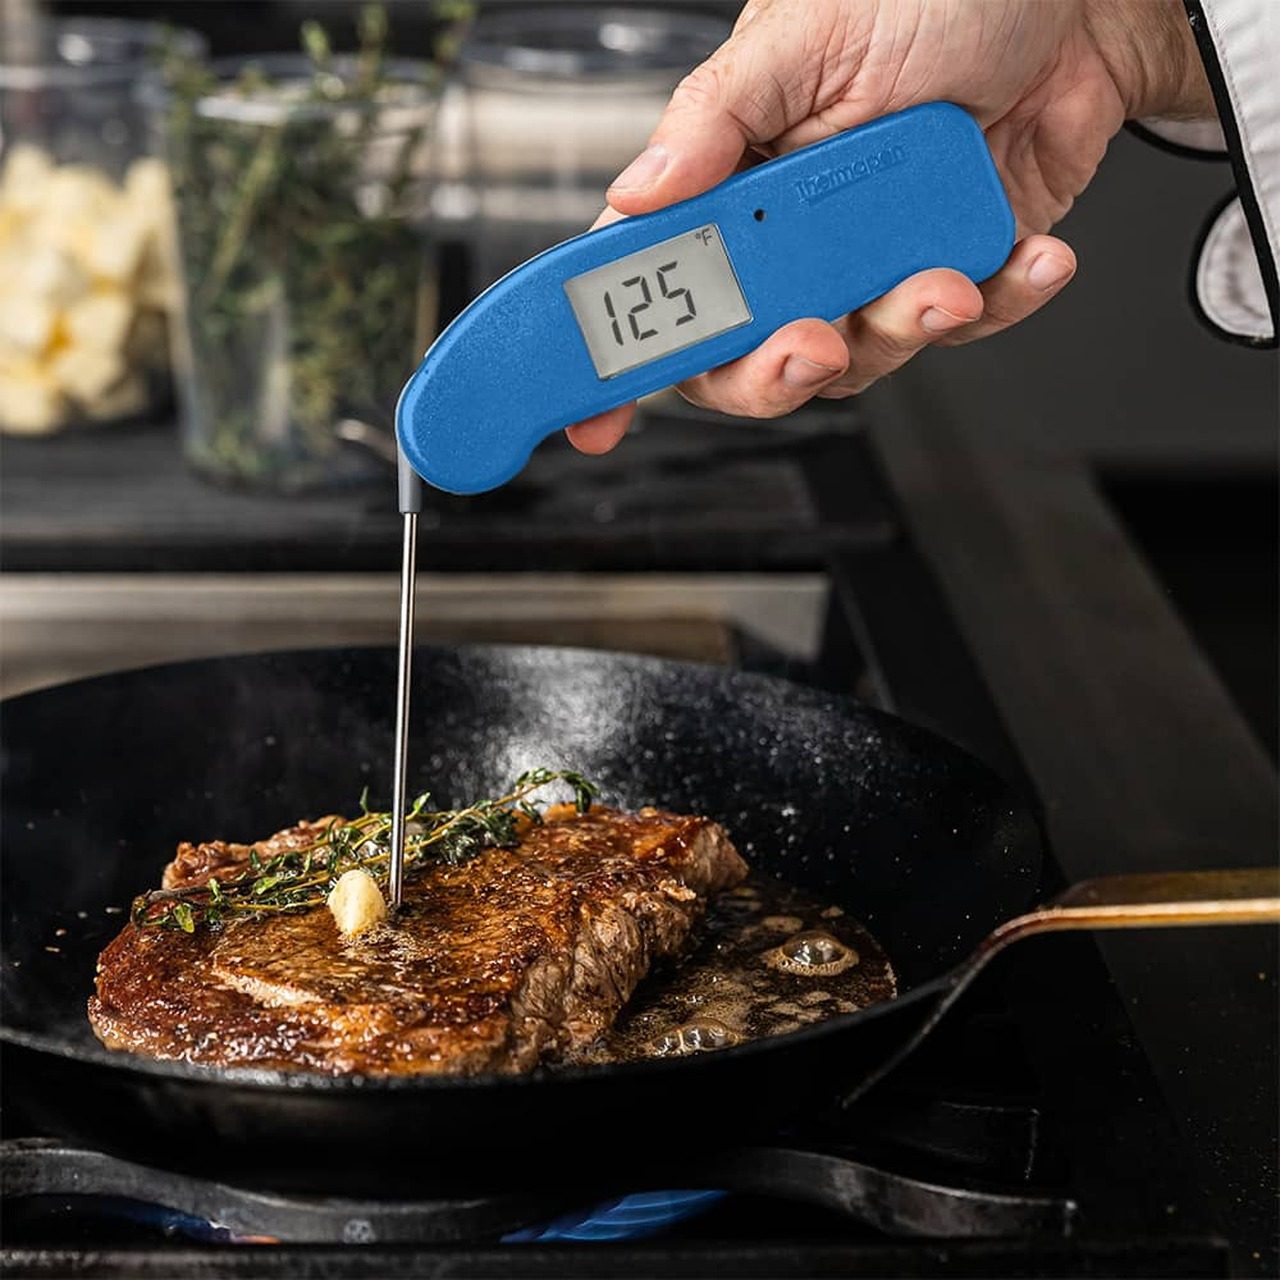 https://www.tasteofhome.com/wp-content/uploads/2020/02/digital-thermometer-thermapen-ecomm-via-thermoworks.com_.jpg?fit=700%2C700